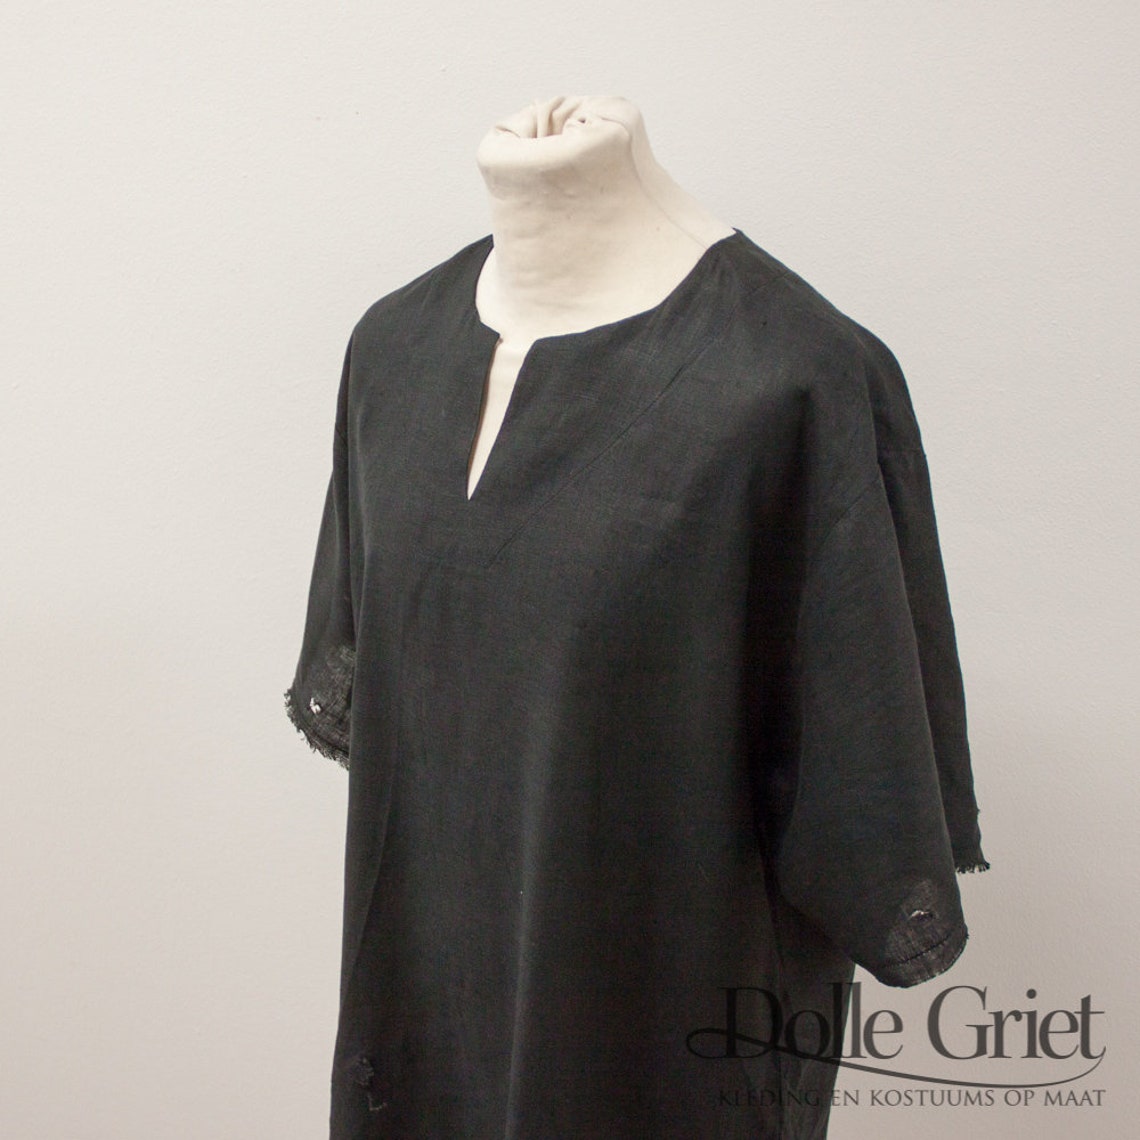 Destroyed Tunic in Black Linen With Holes Size M EU 50 - Etsy